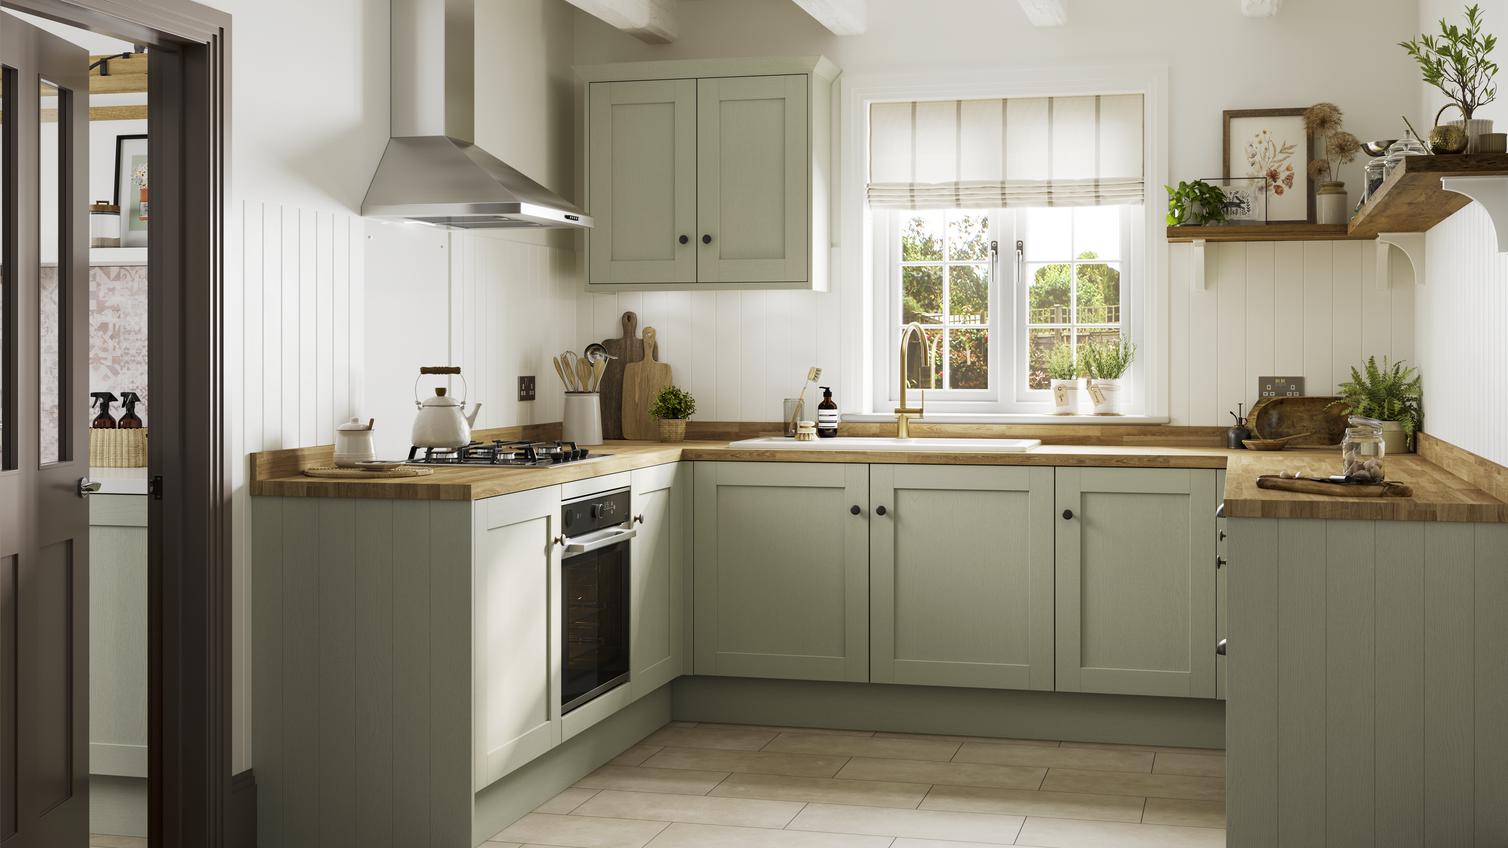 Sage green kitchen with shaker cabinet doors. It is in a u-shaped layout with a gas hob and timber-effect worktop